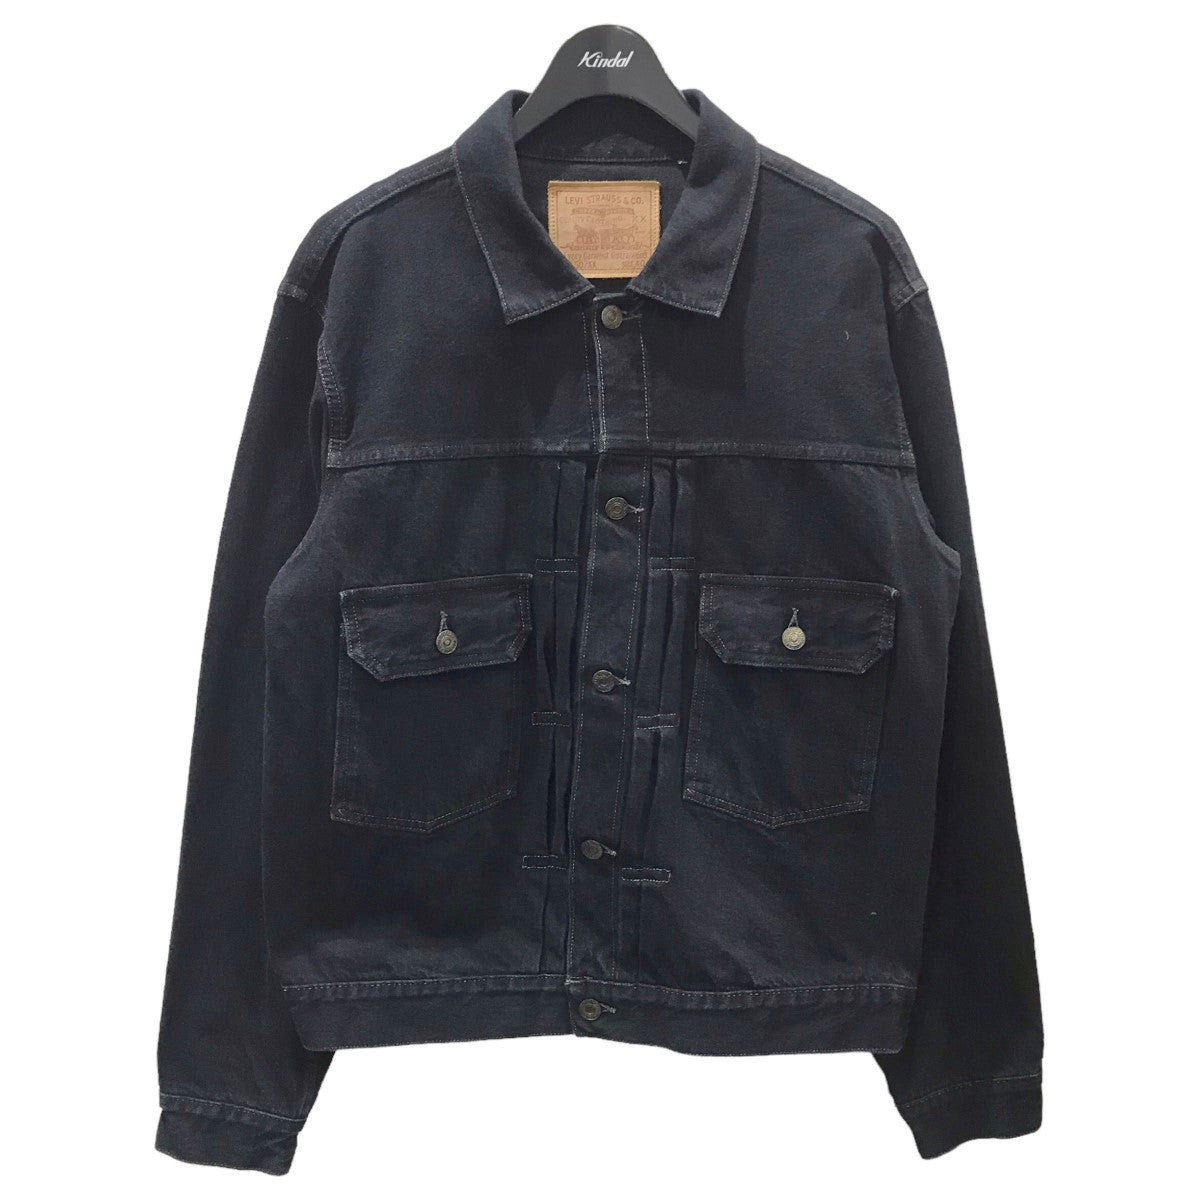 Levi's Vintage Clothing(リーバイス ヴィンテージ クロージング 